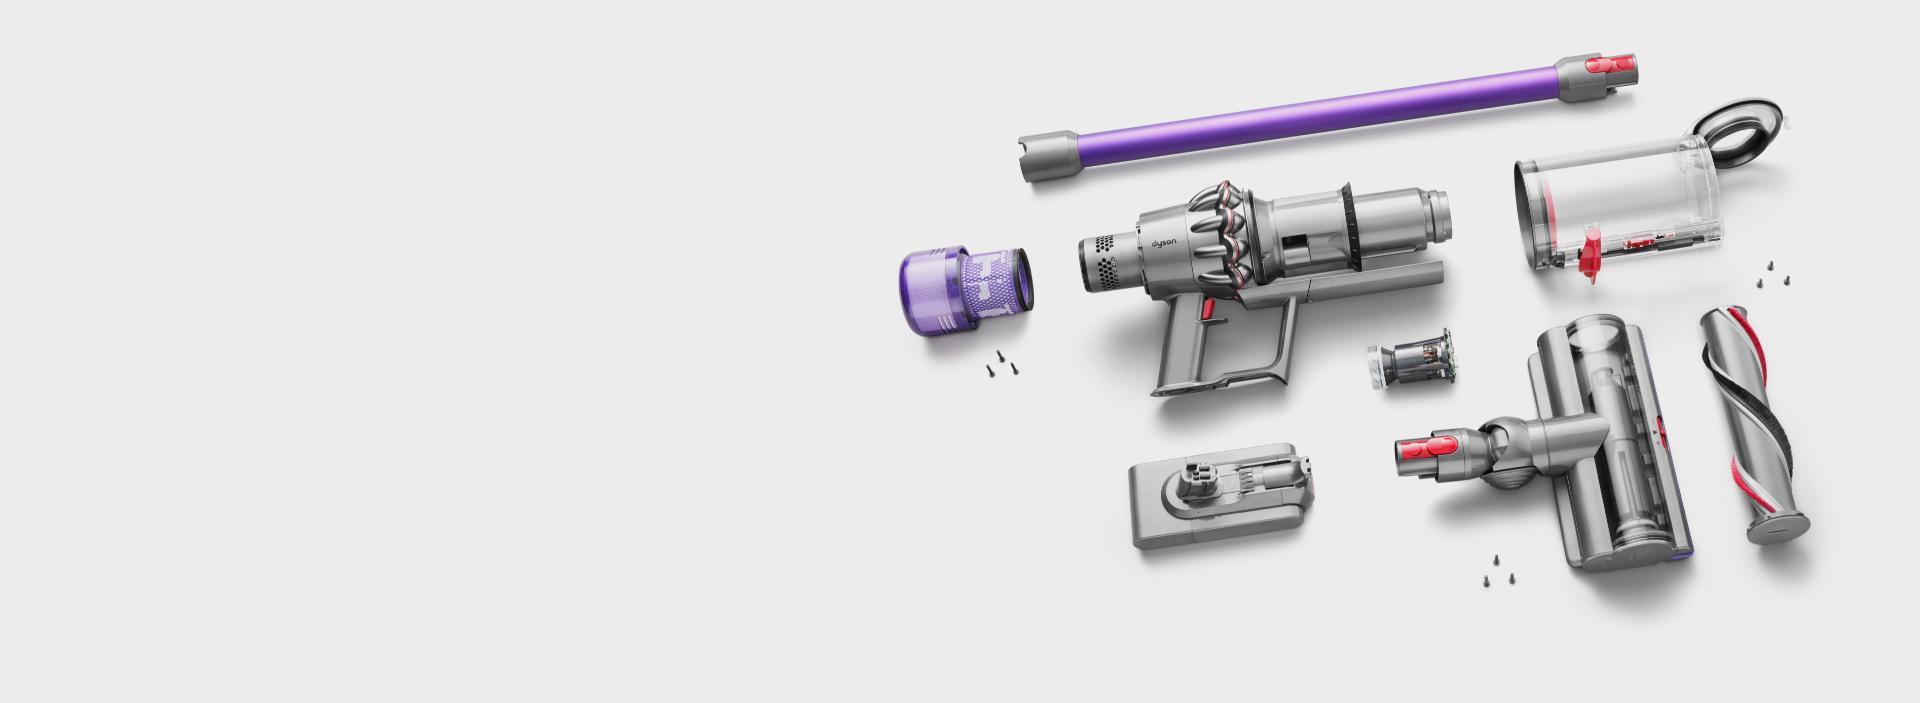 A Dyson vacuum disassembled.